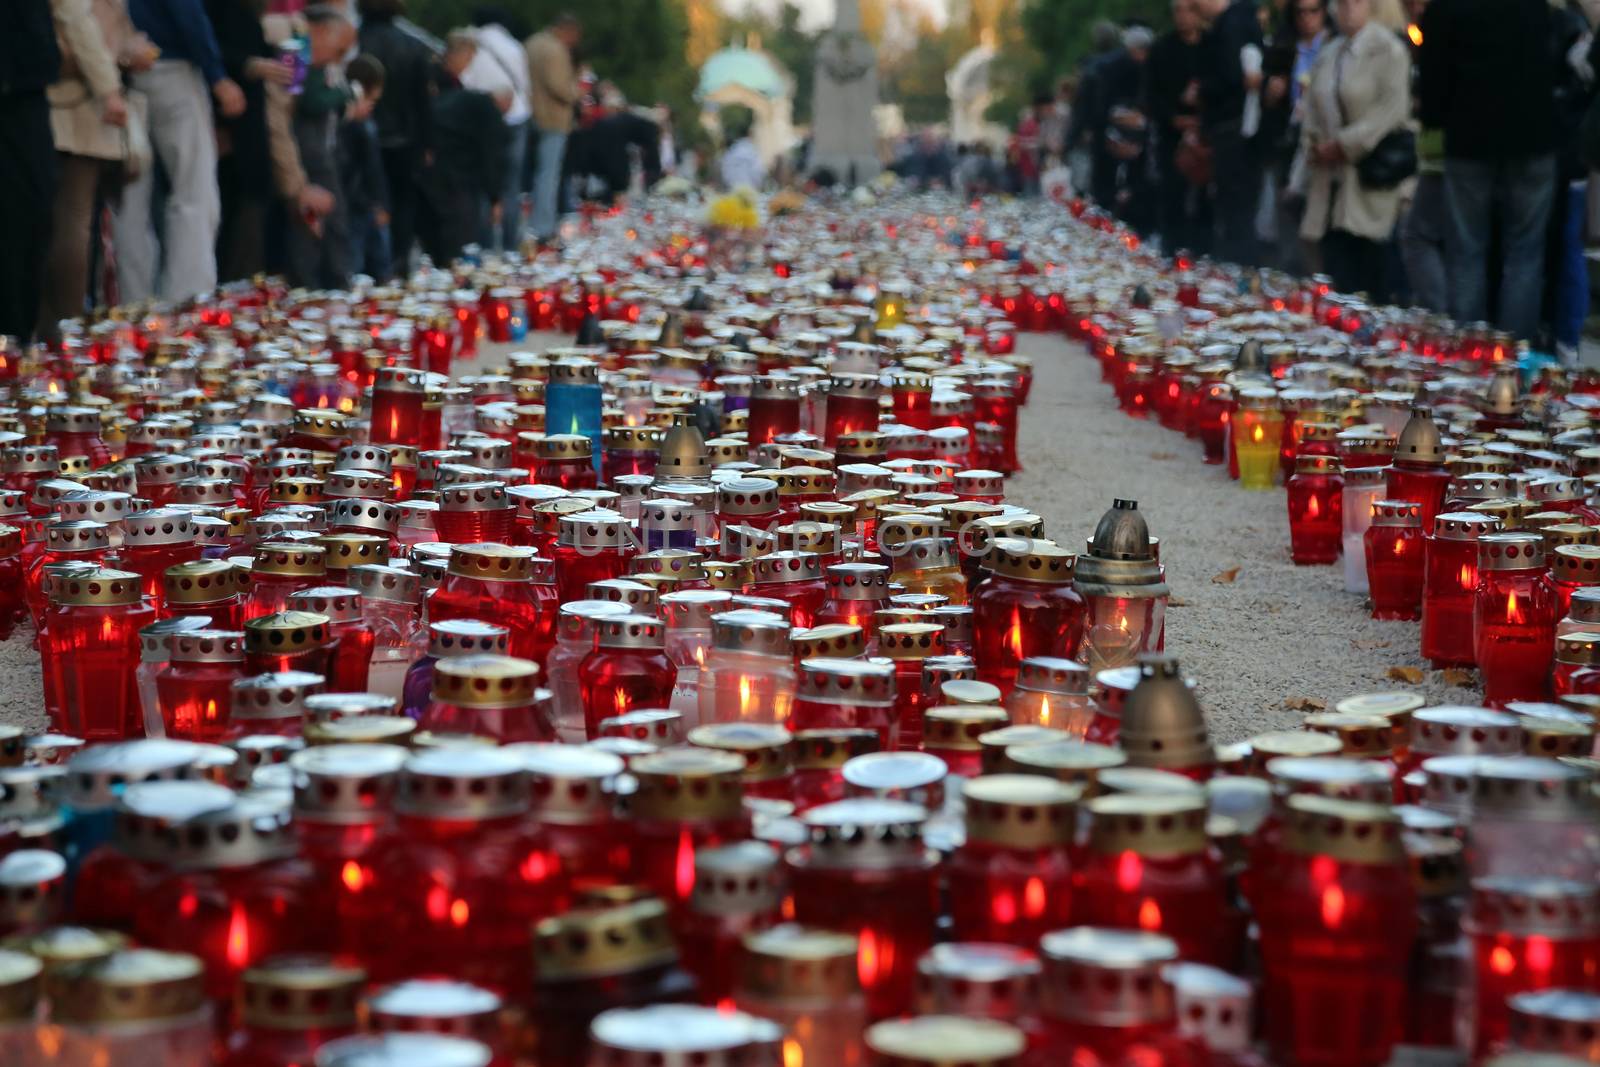 Zagreb cemetery Mirogoj on All Saints Day visited by thousands of people light candles for their deceased family members on 01 November 2013 in Zagreb.